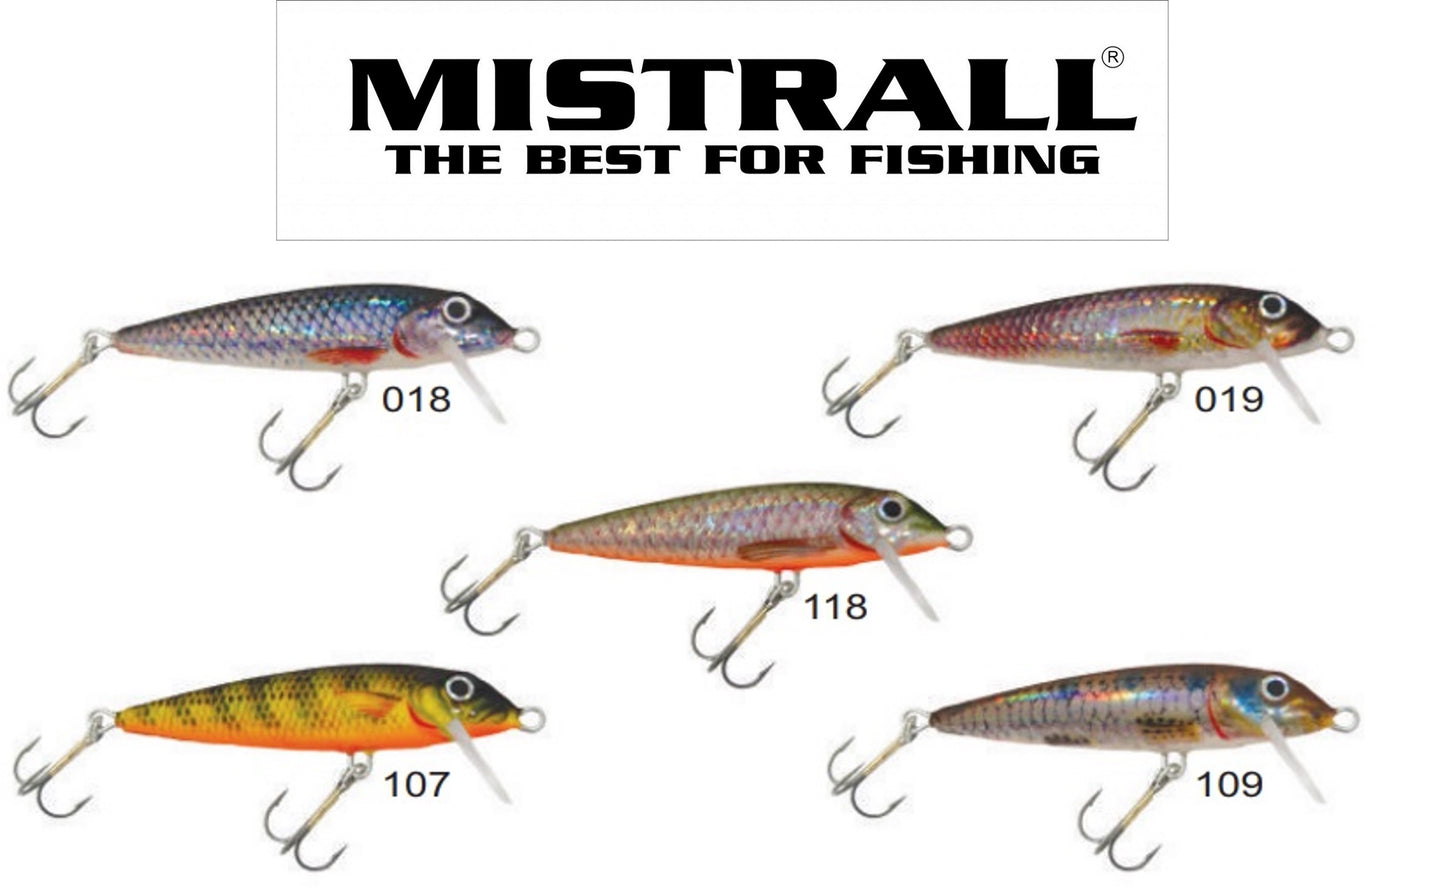 Mistrall Classic floater lure 7cm – Hobbymania CY